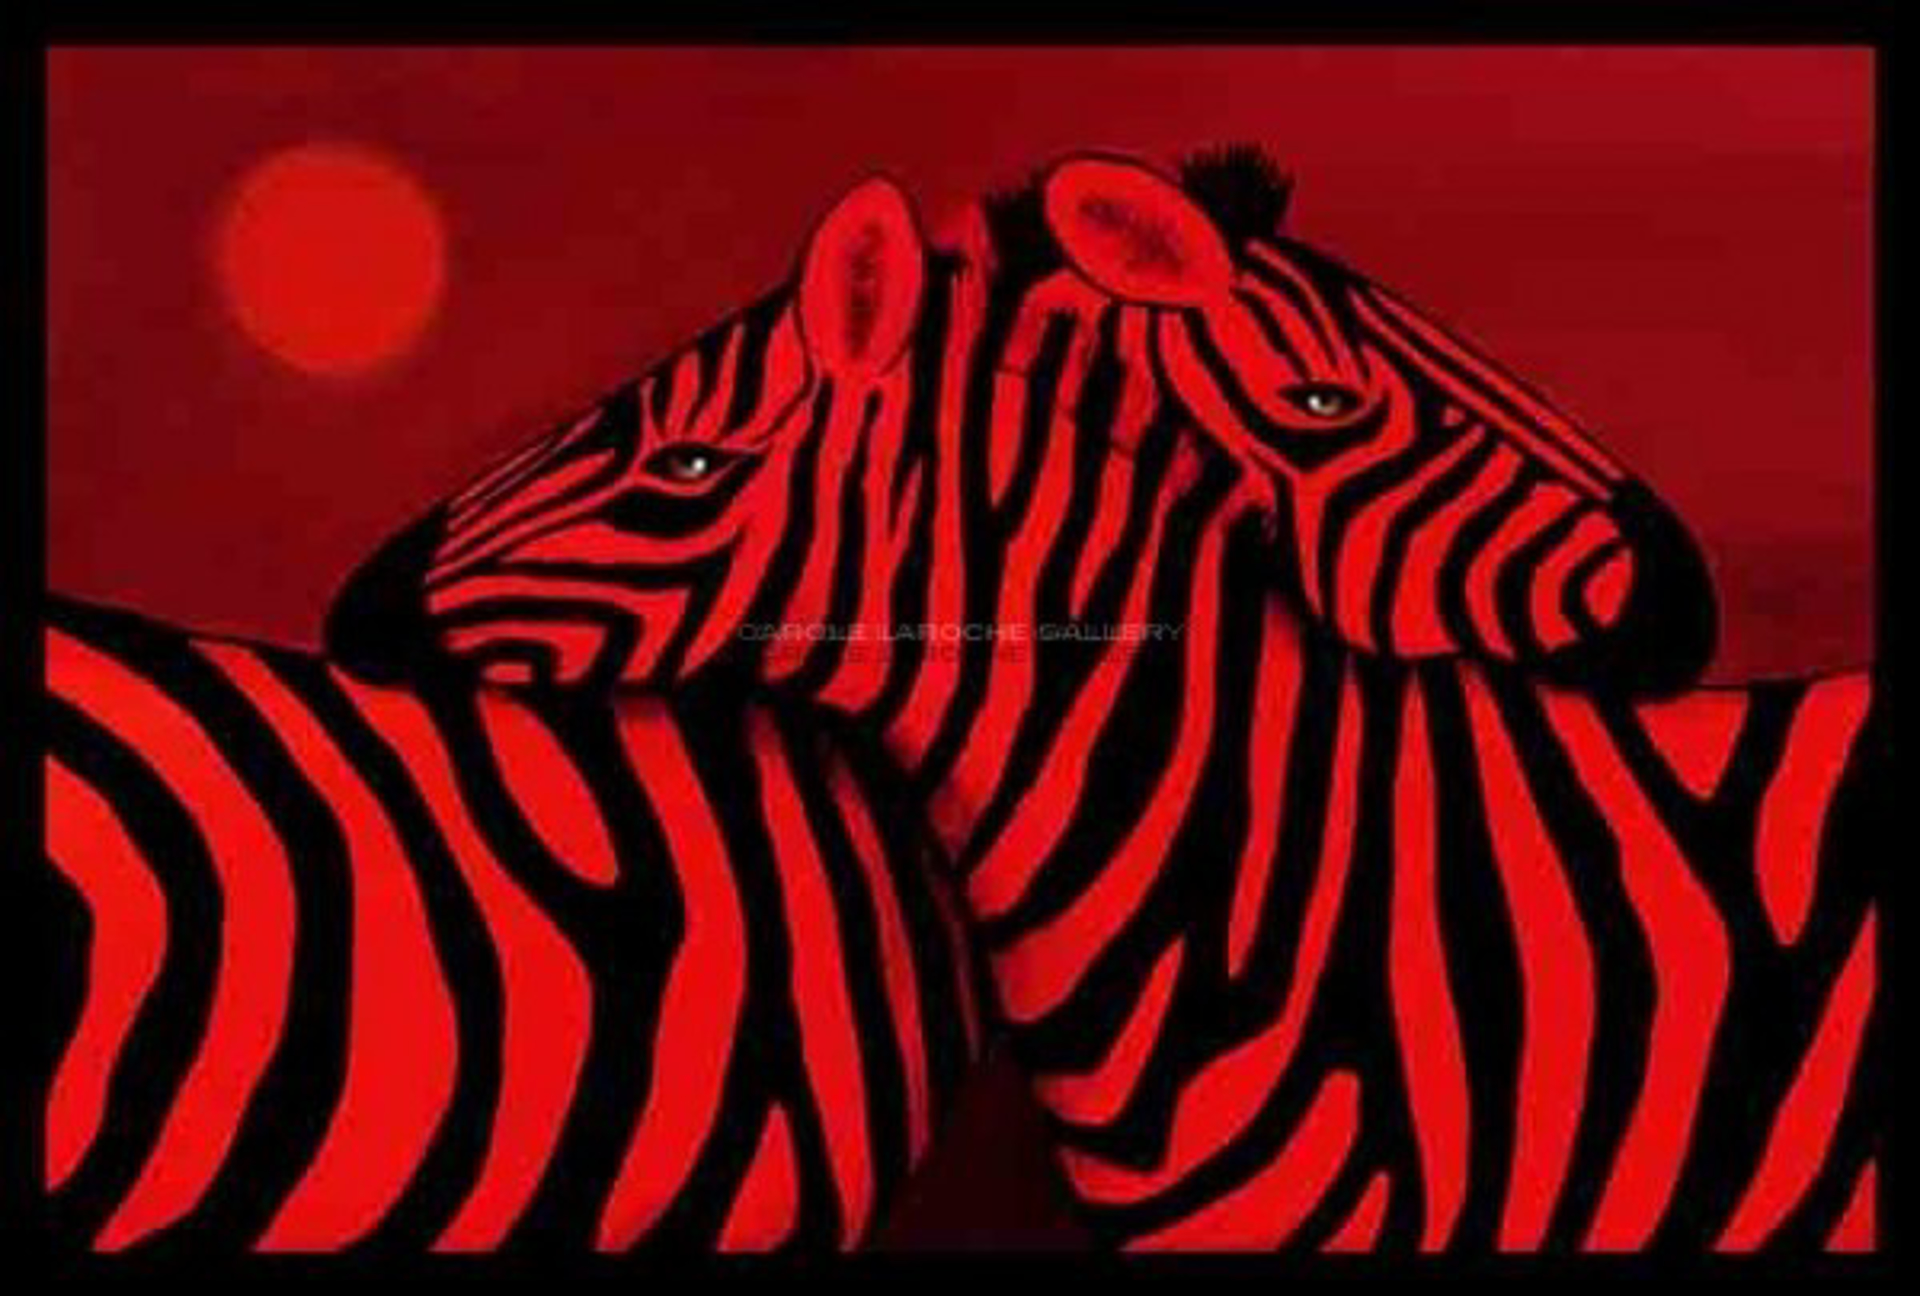 TWO RED ZEBRAS - limited edition giclee on canvas: (large) 40"x60" $3700 or (medium) 30"x40" $2400 by Carole LaRoche